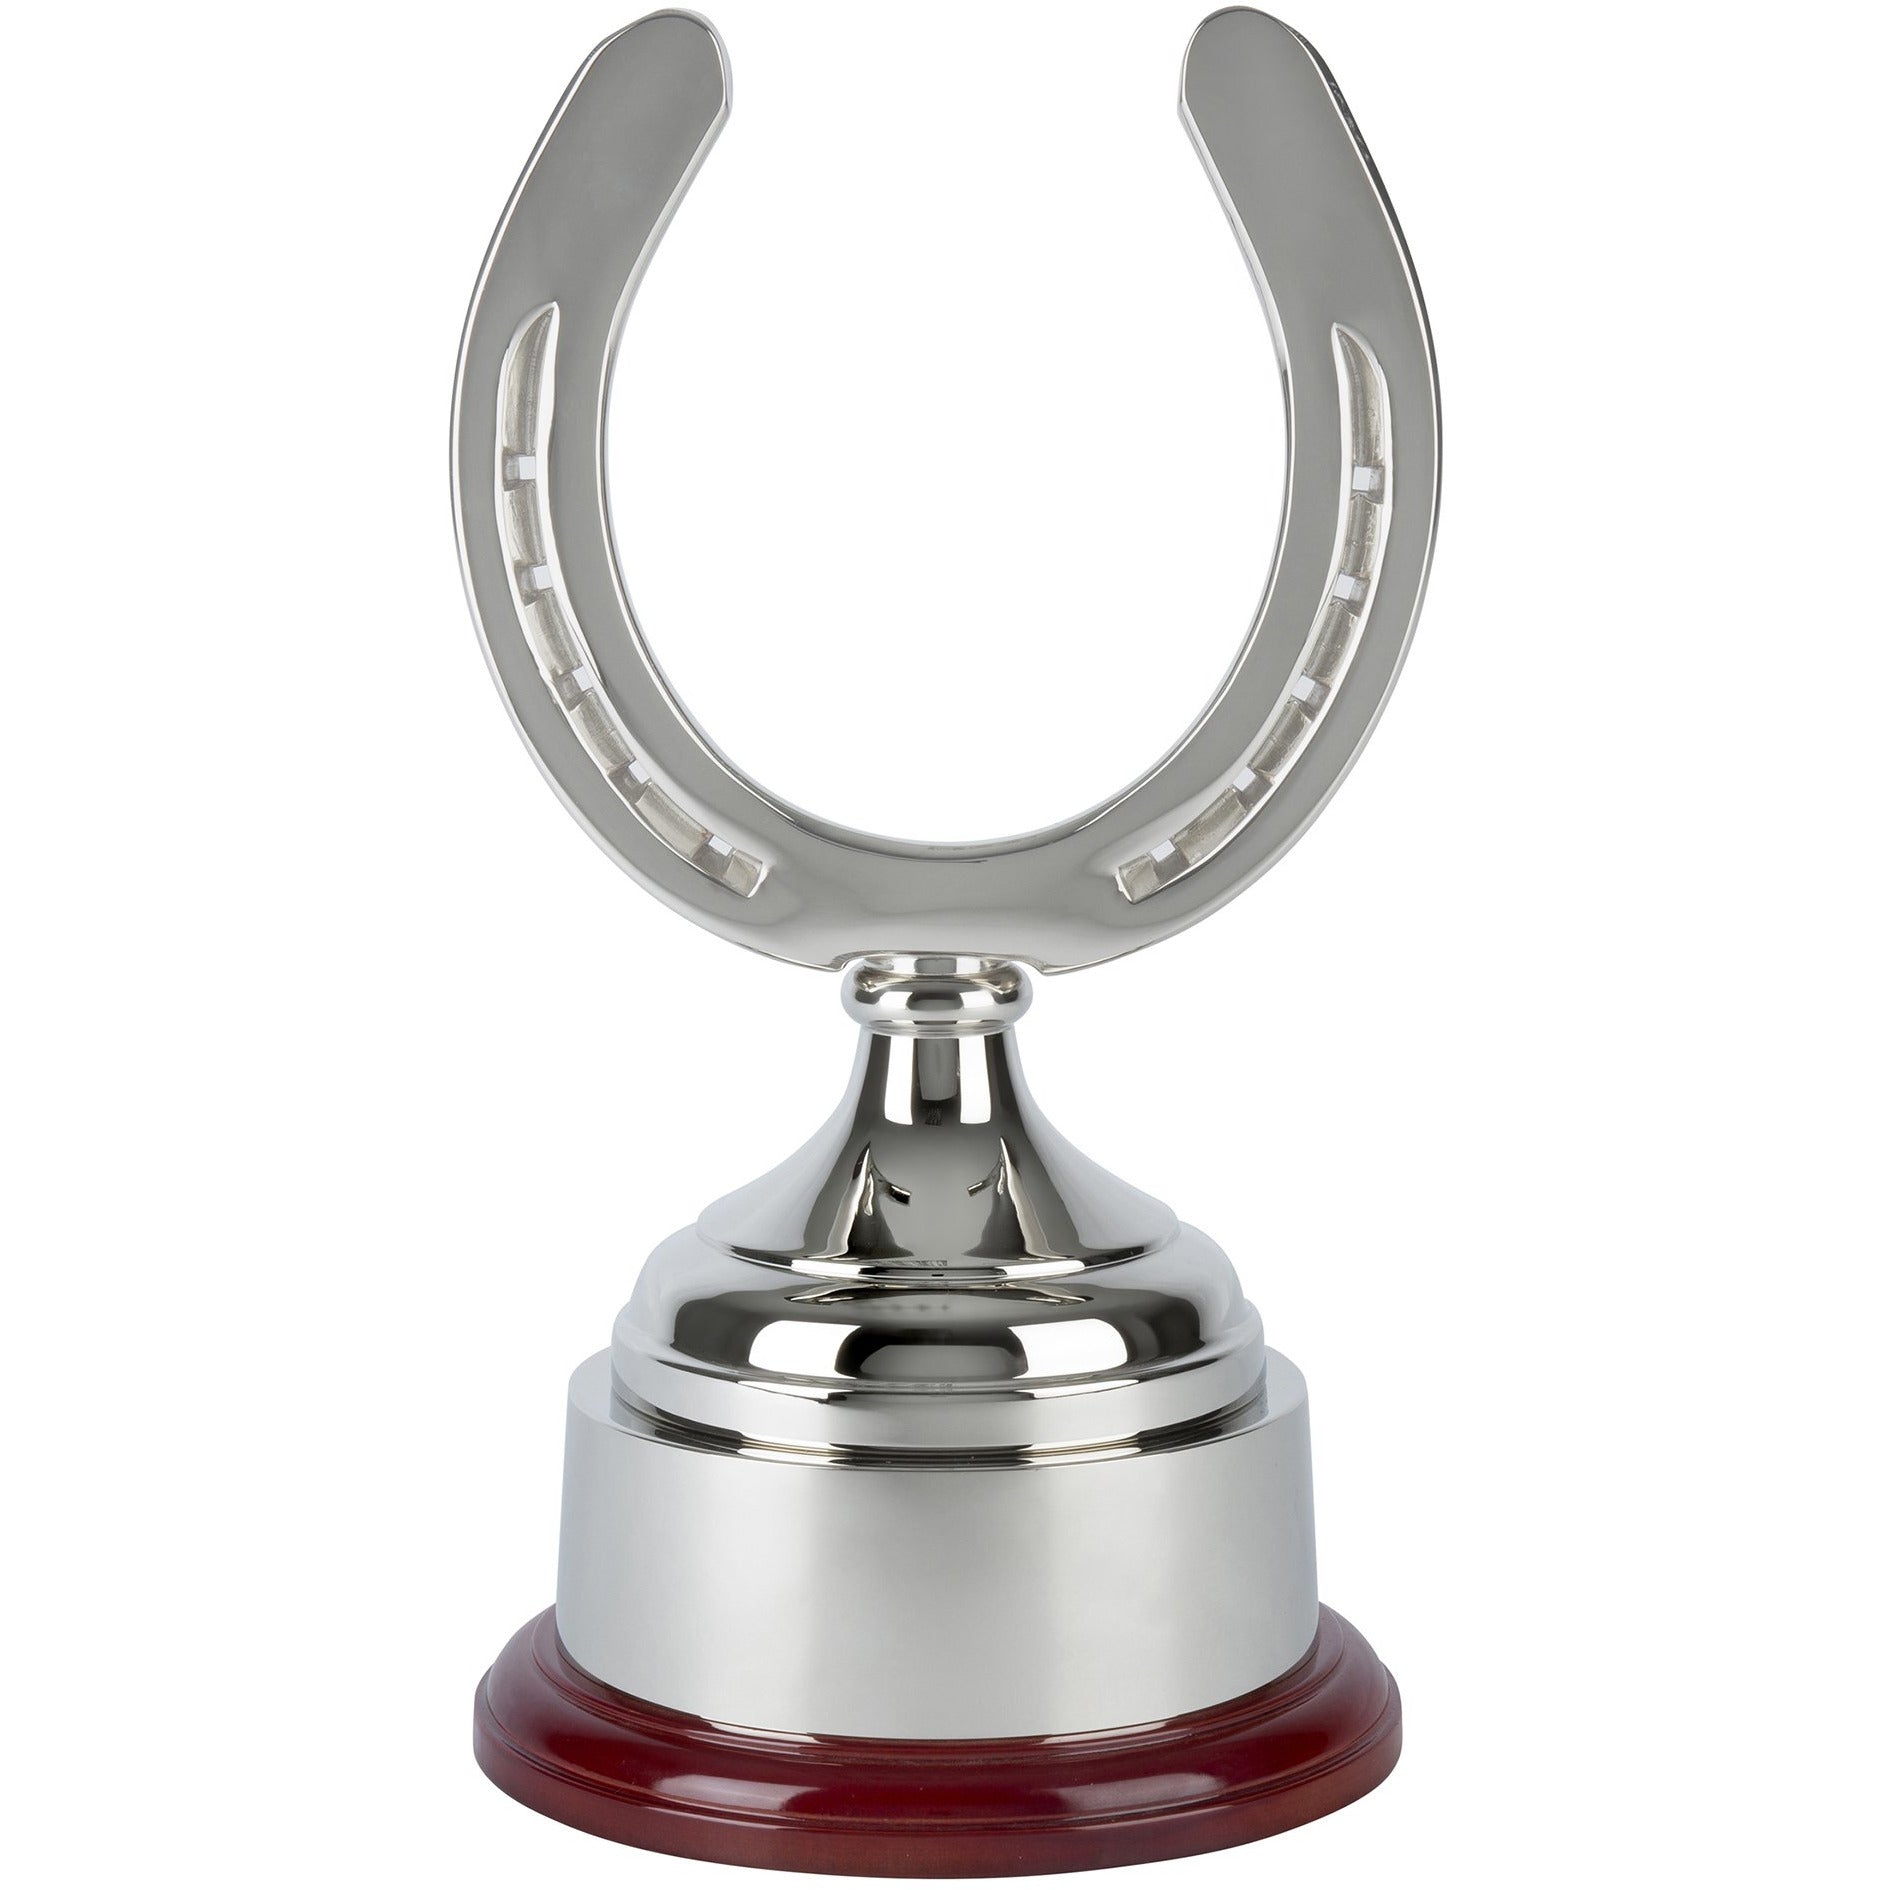 Nickel Plated Life-Size Horse Shoe Equestrian Award